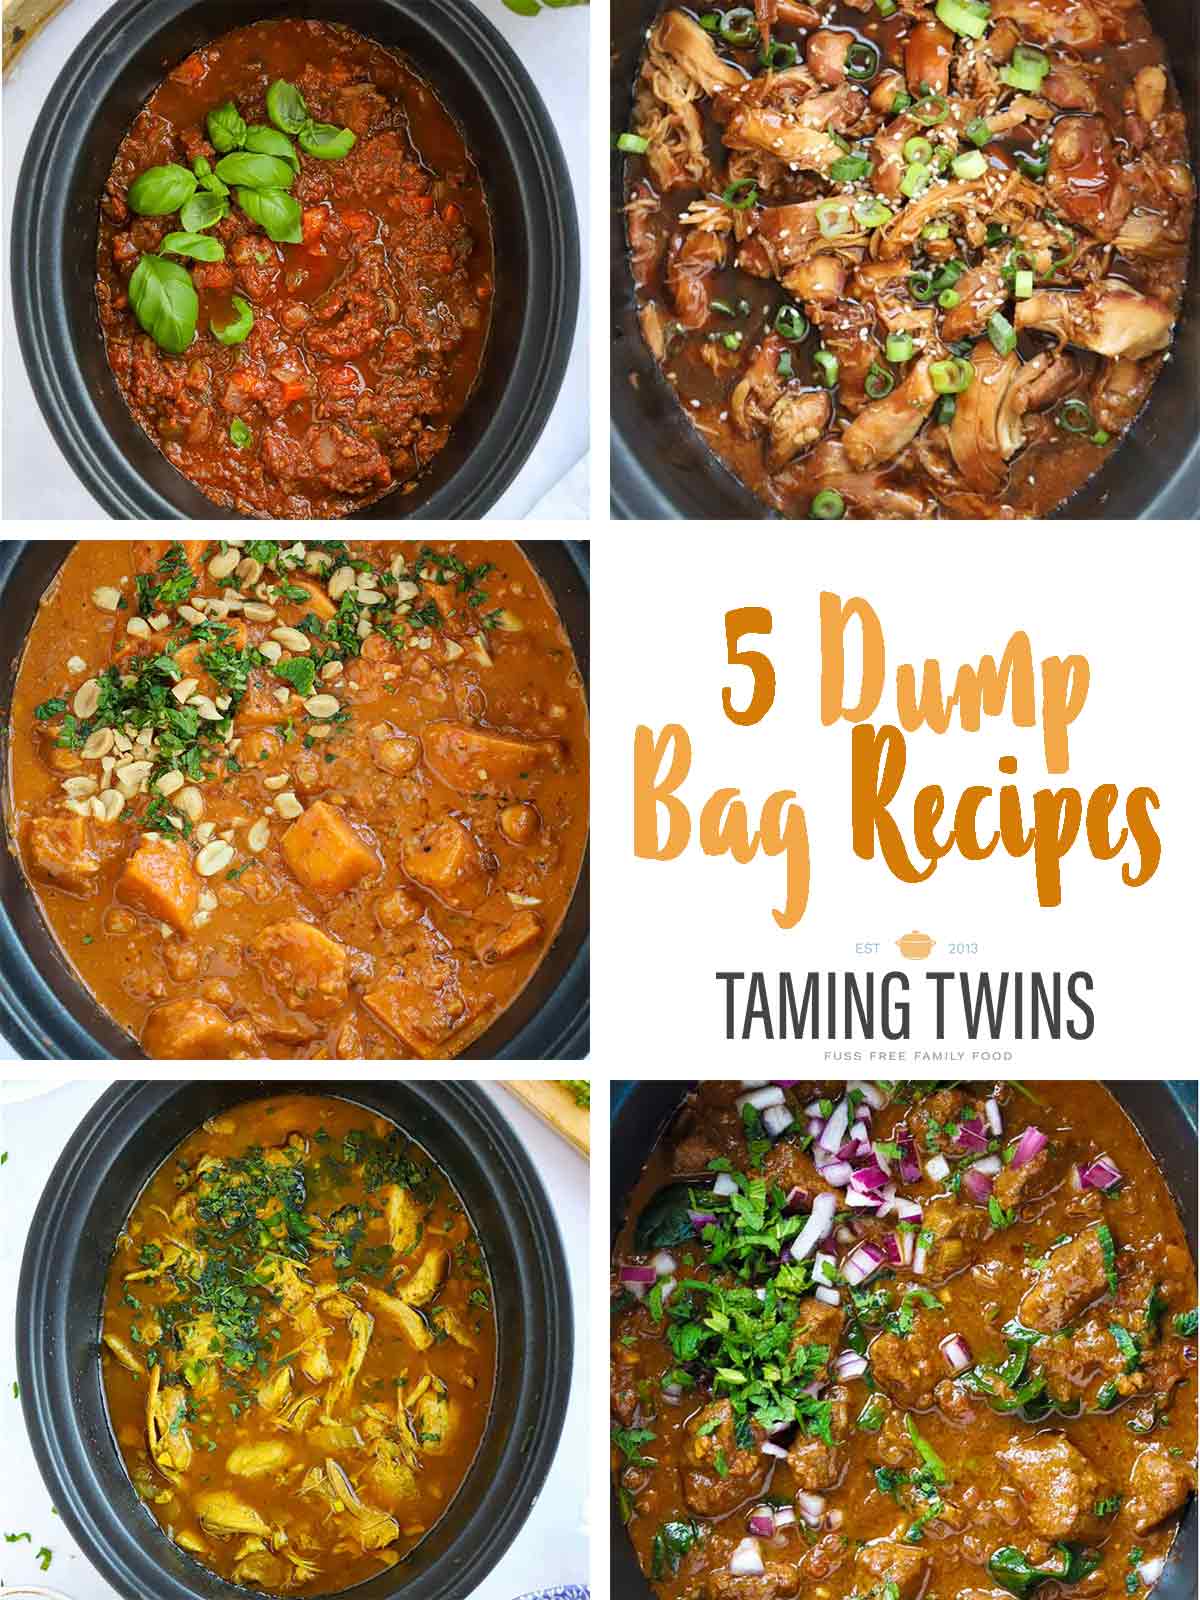 Summary photo of all 5 dump bag recipes included in this post.